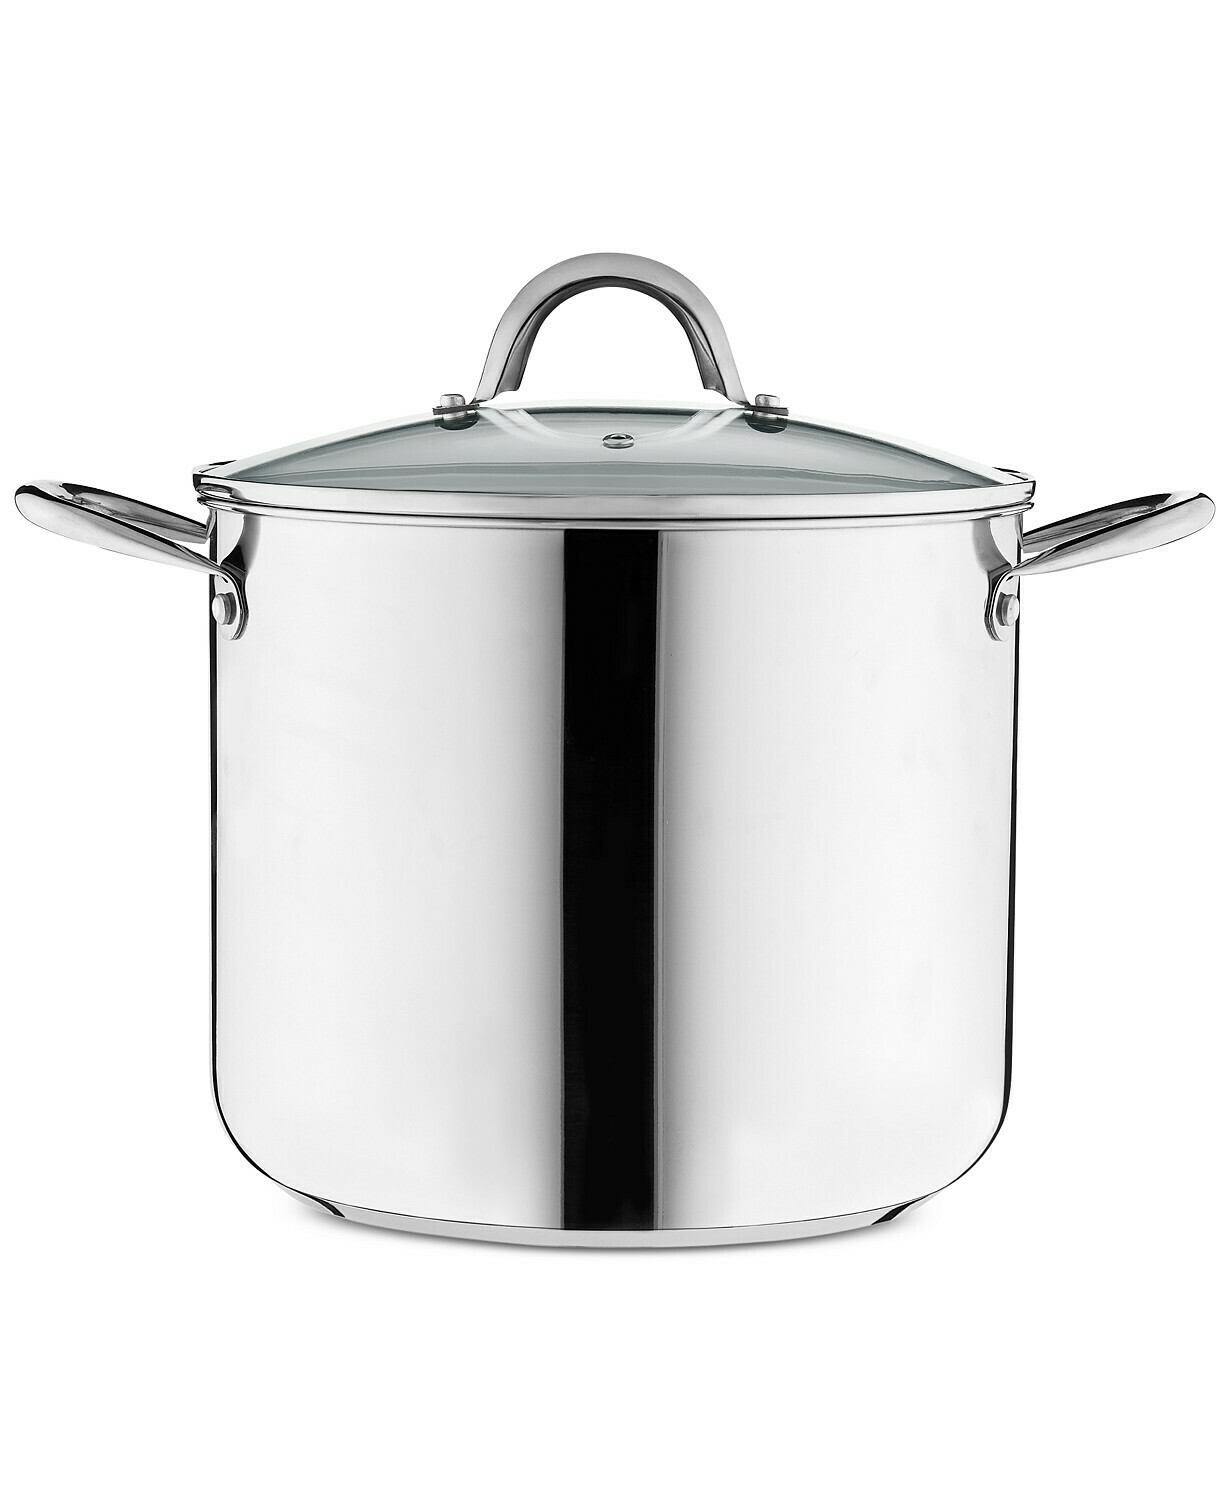 Tools of the Trade 12-Qt. Stainless Steel Stockpot with Lid